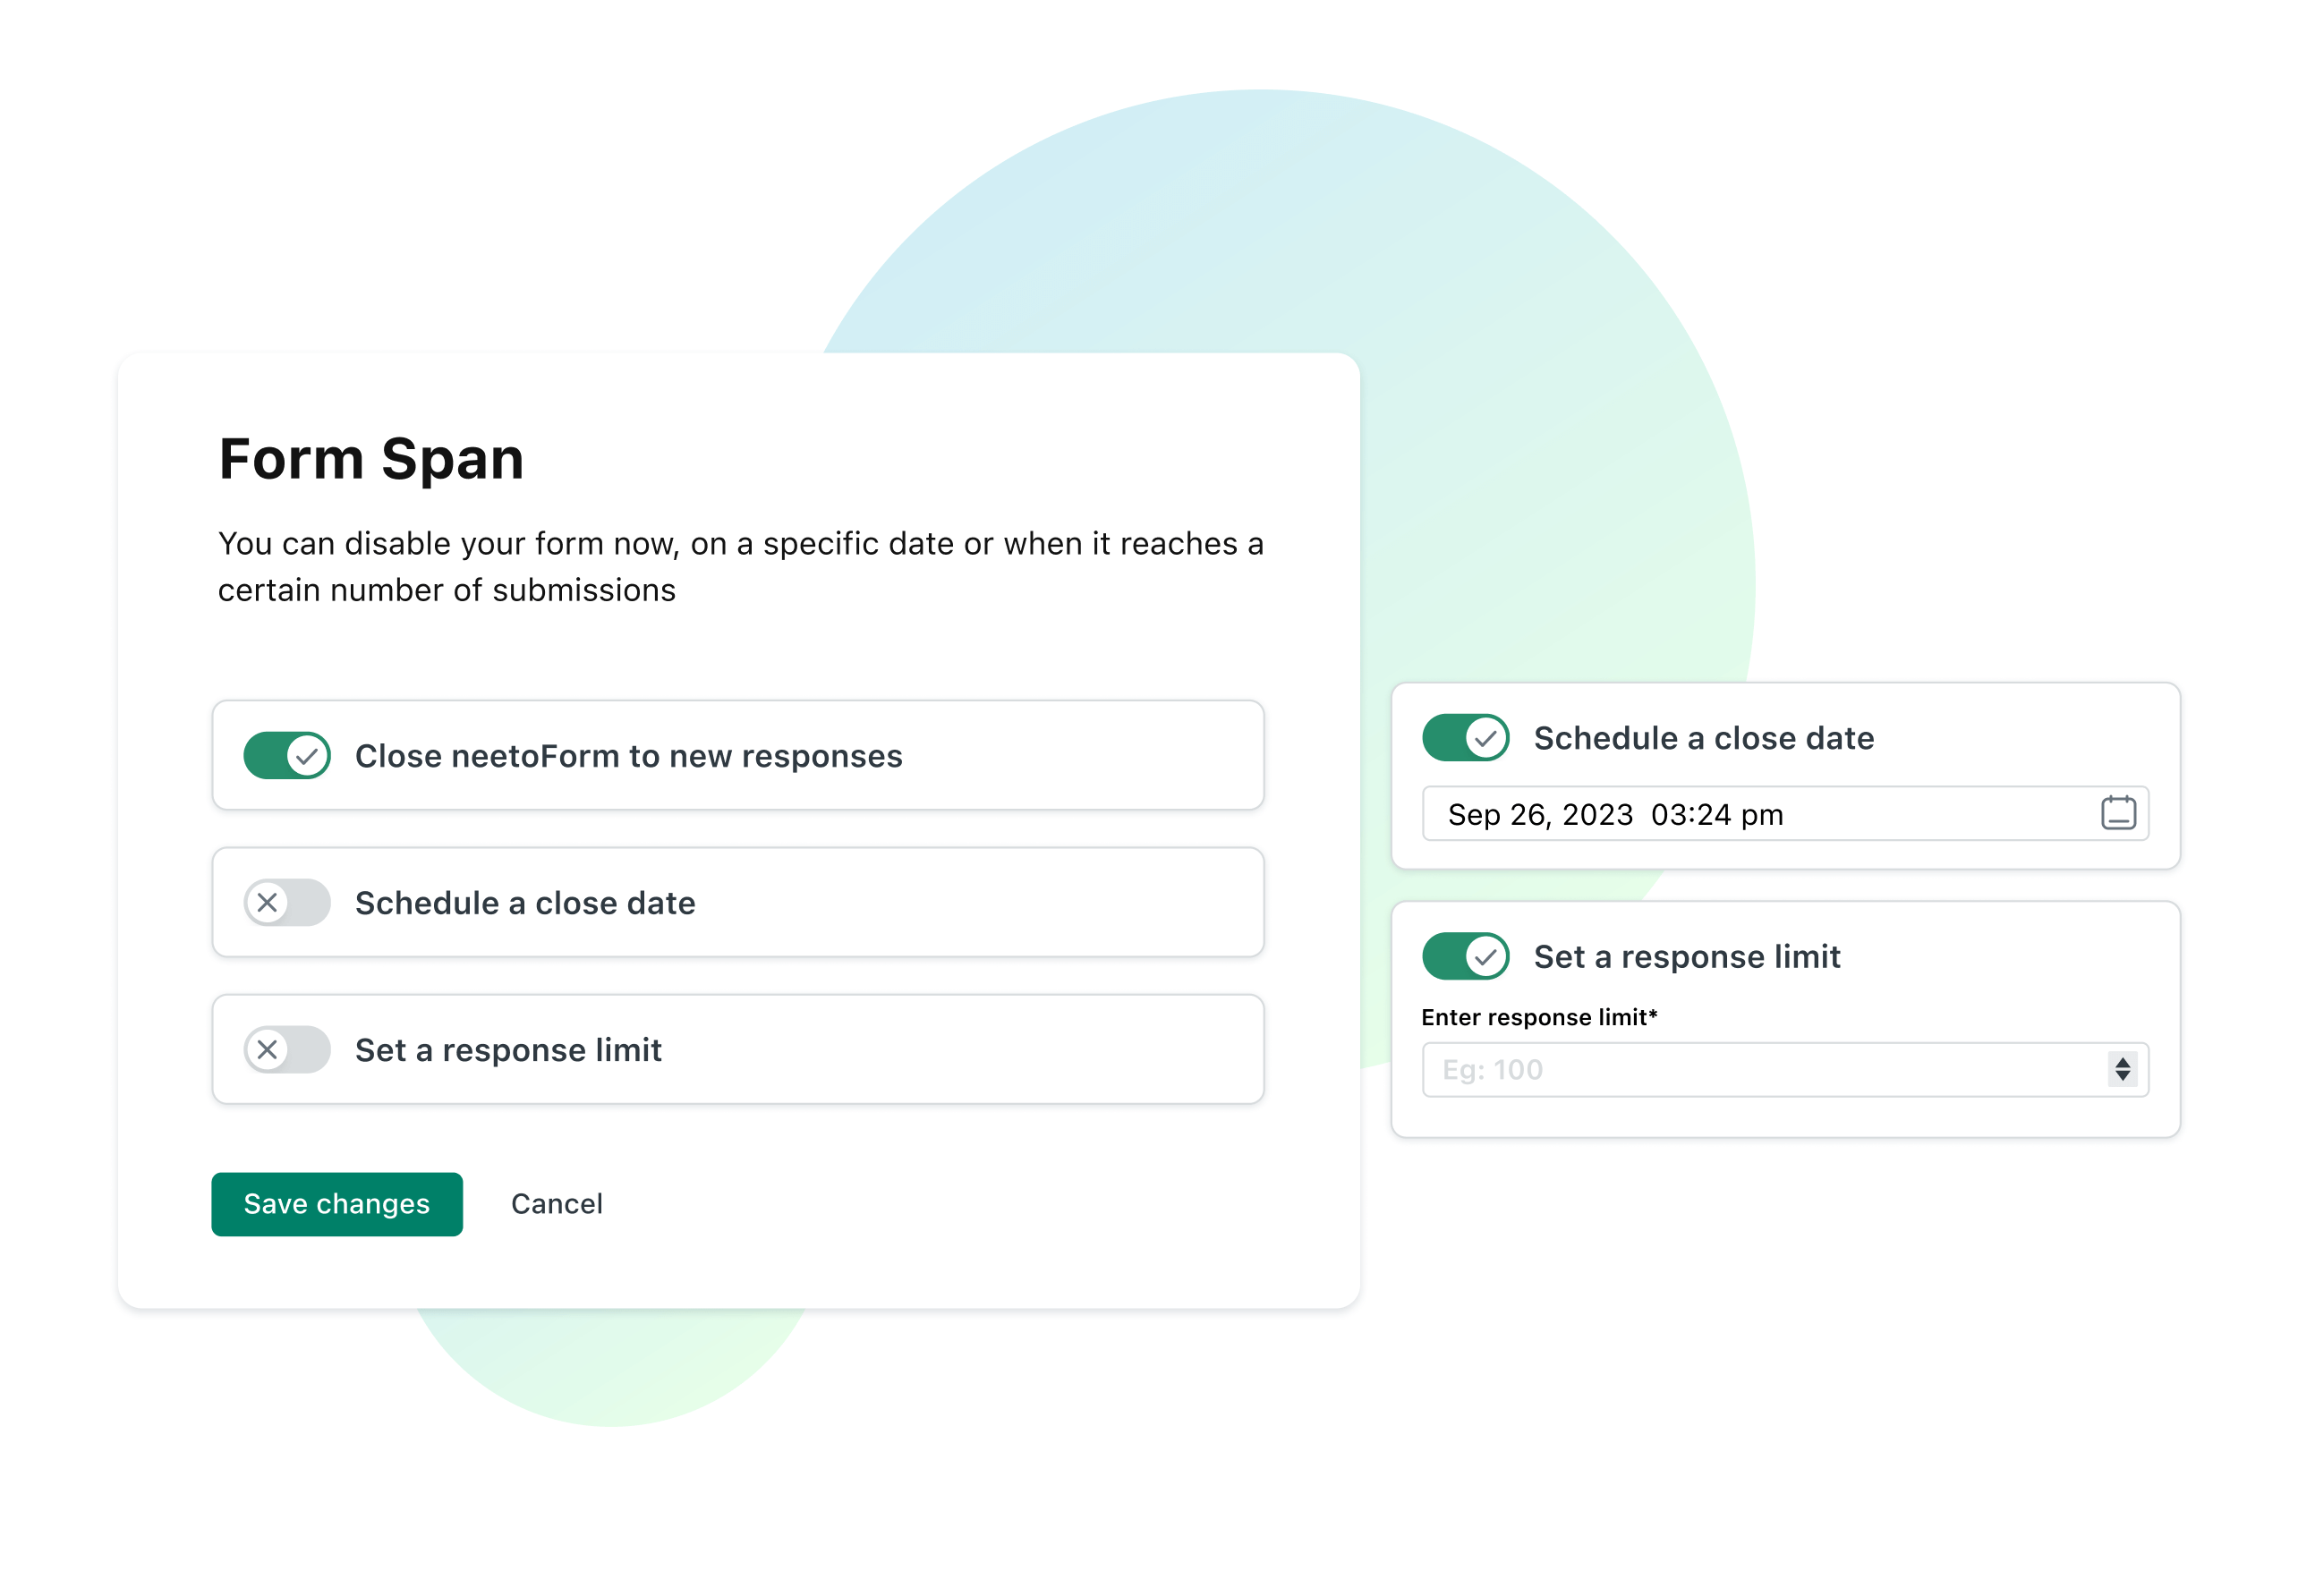 Enable-Disable Form